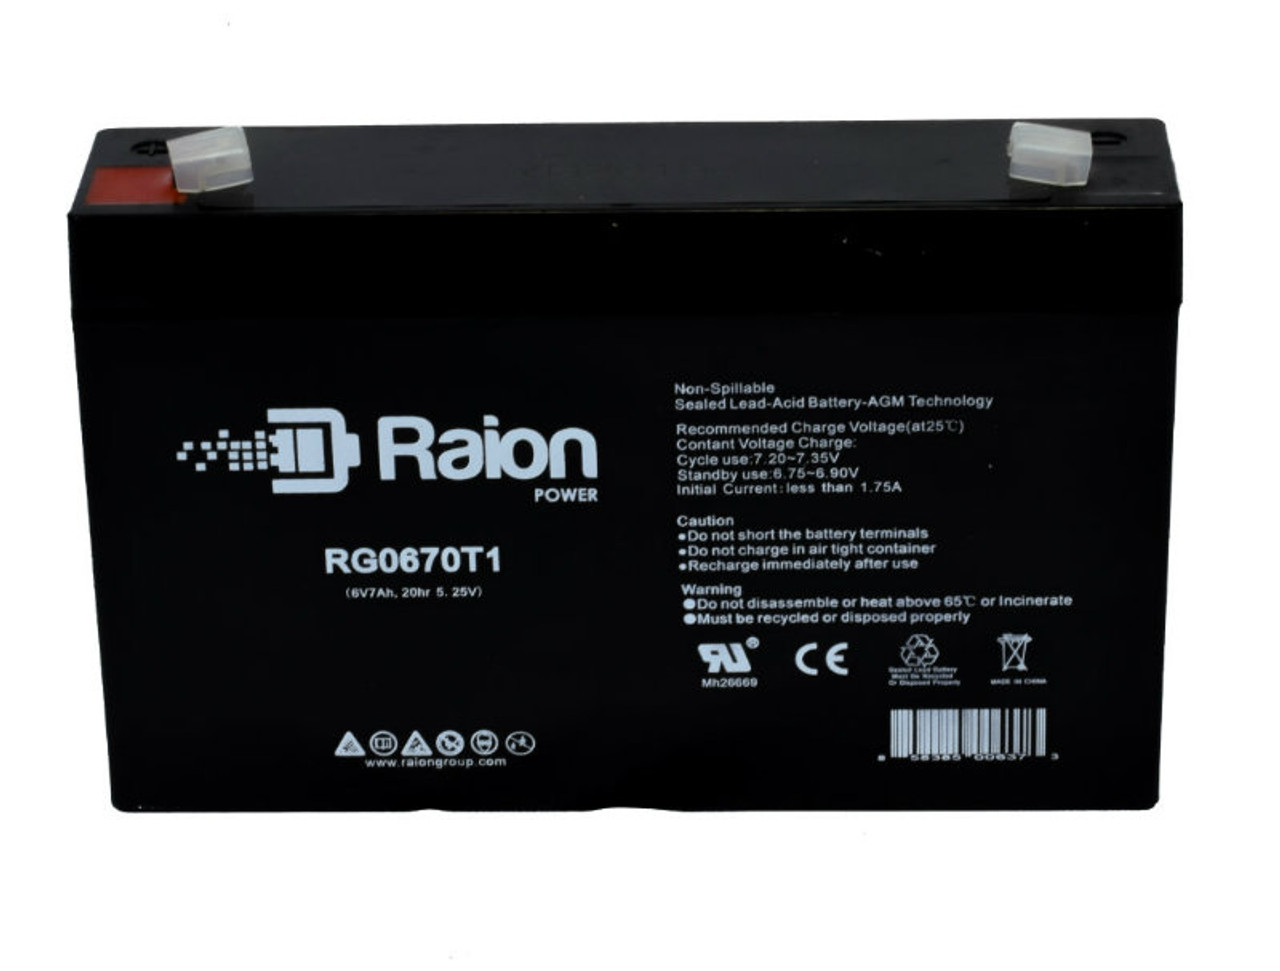 Raion Power RG0670T1 Replacement Battery Cartridge for Lightalarms PL1